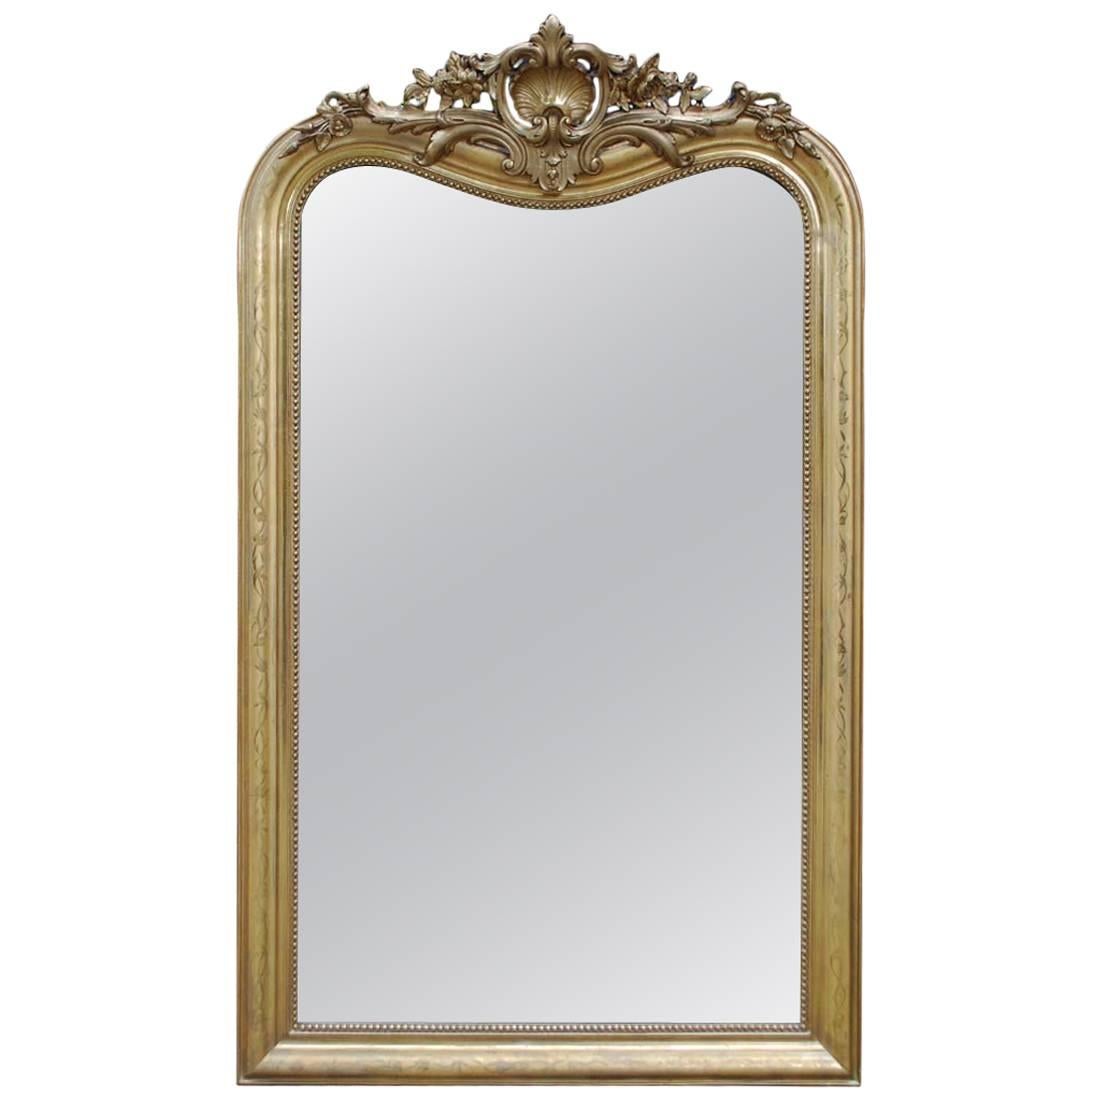 19th-century French Louis Philippe gold leaf gilt mirror with crest